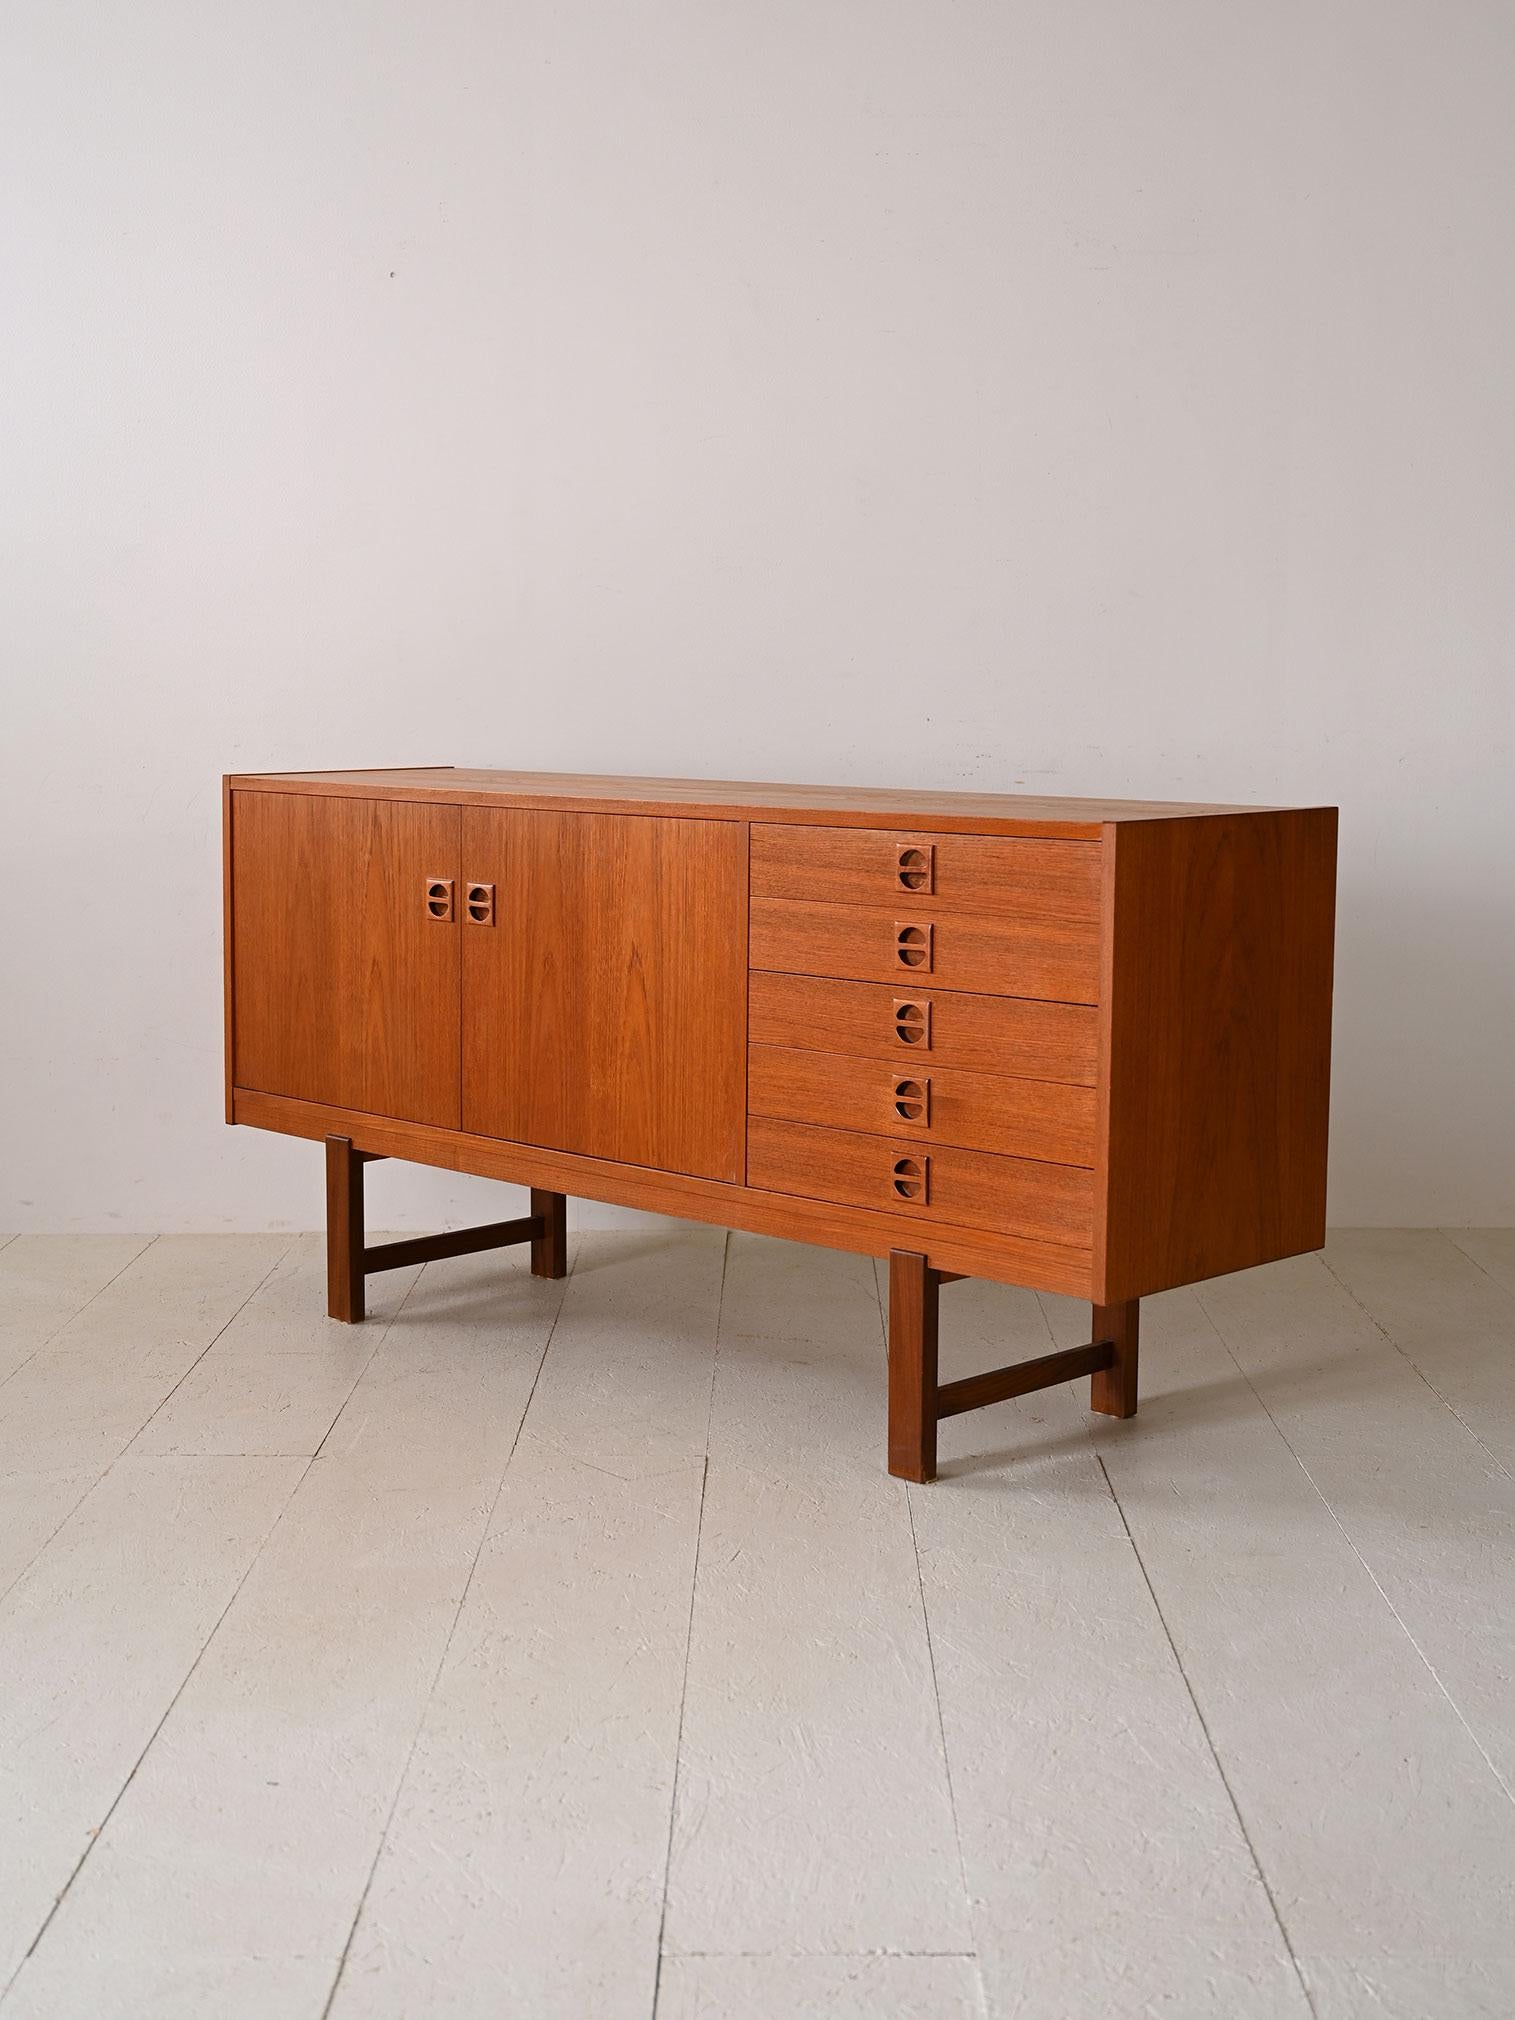 1900s teak sideboard with drawers and doors In Good Condition For Sale In Brescia, IT